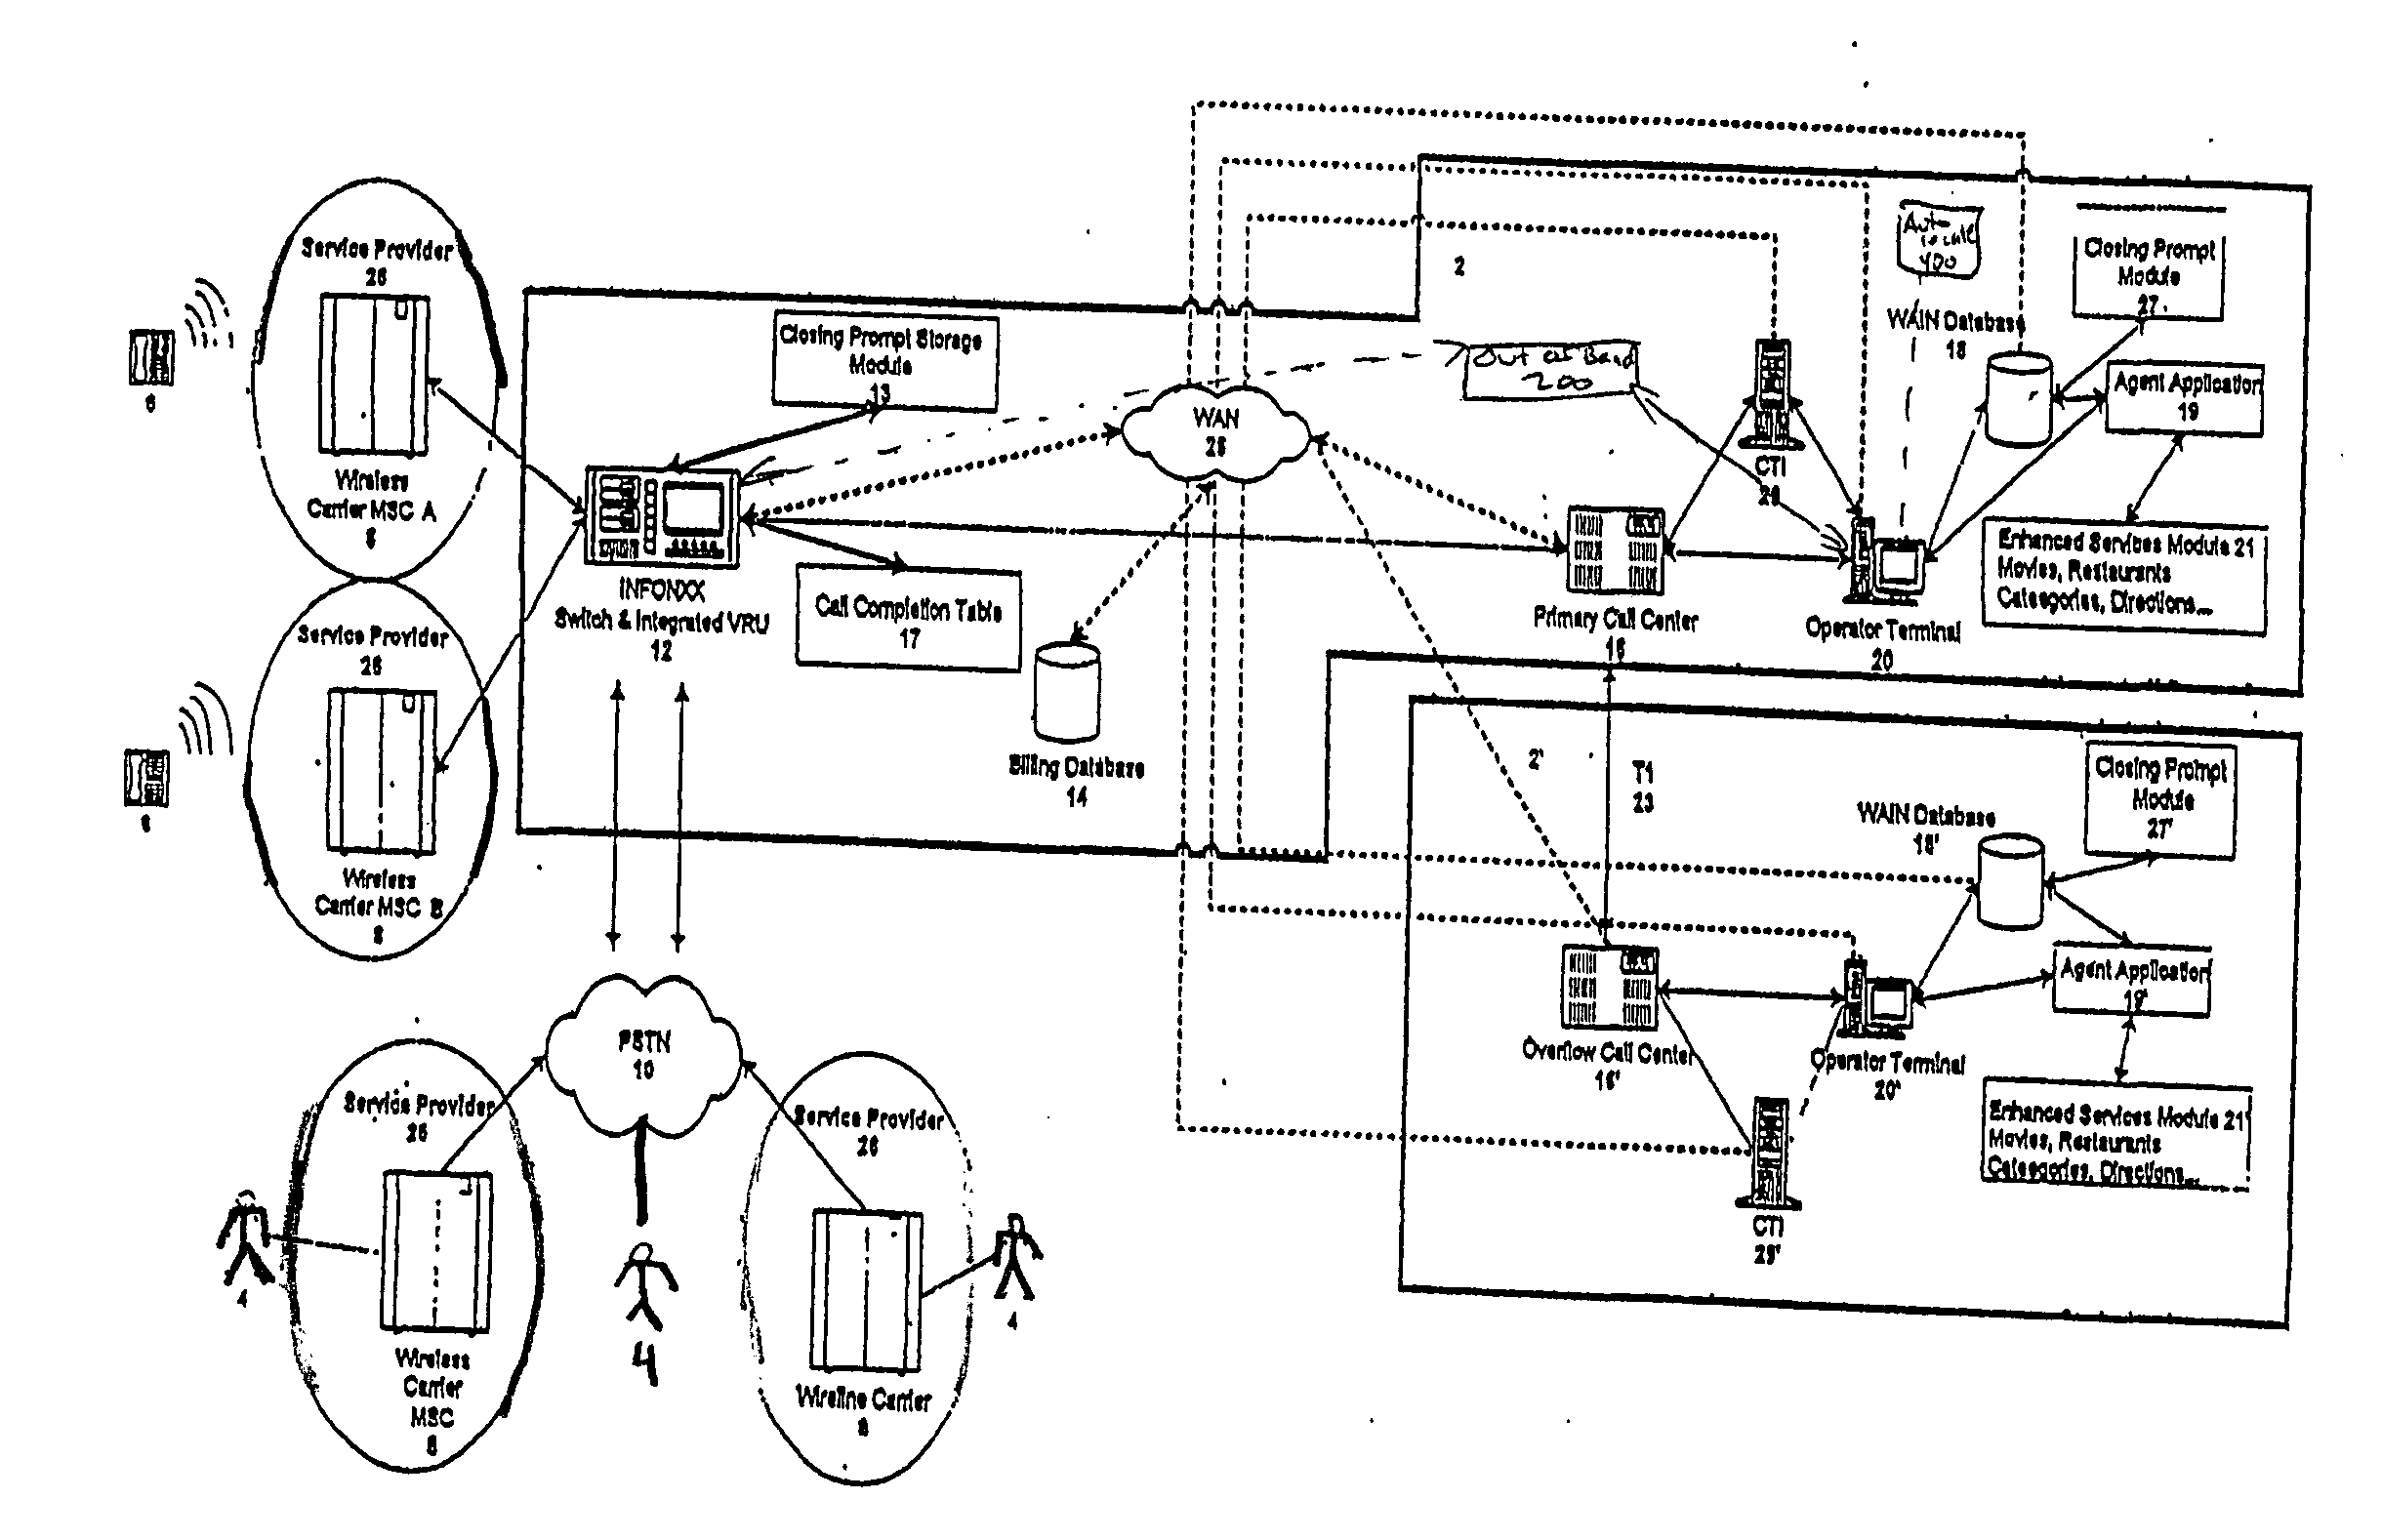 System and method for efficient call management for directory assistance services